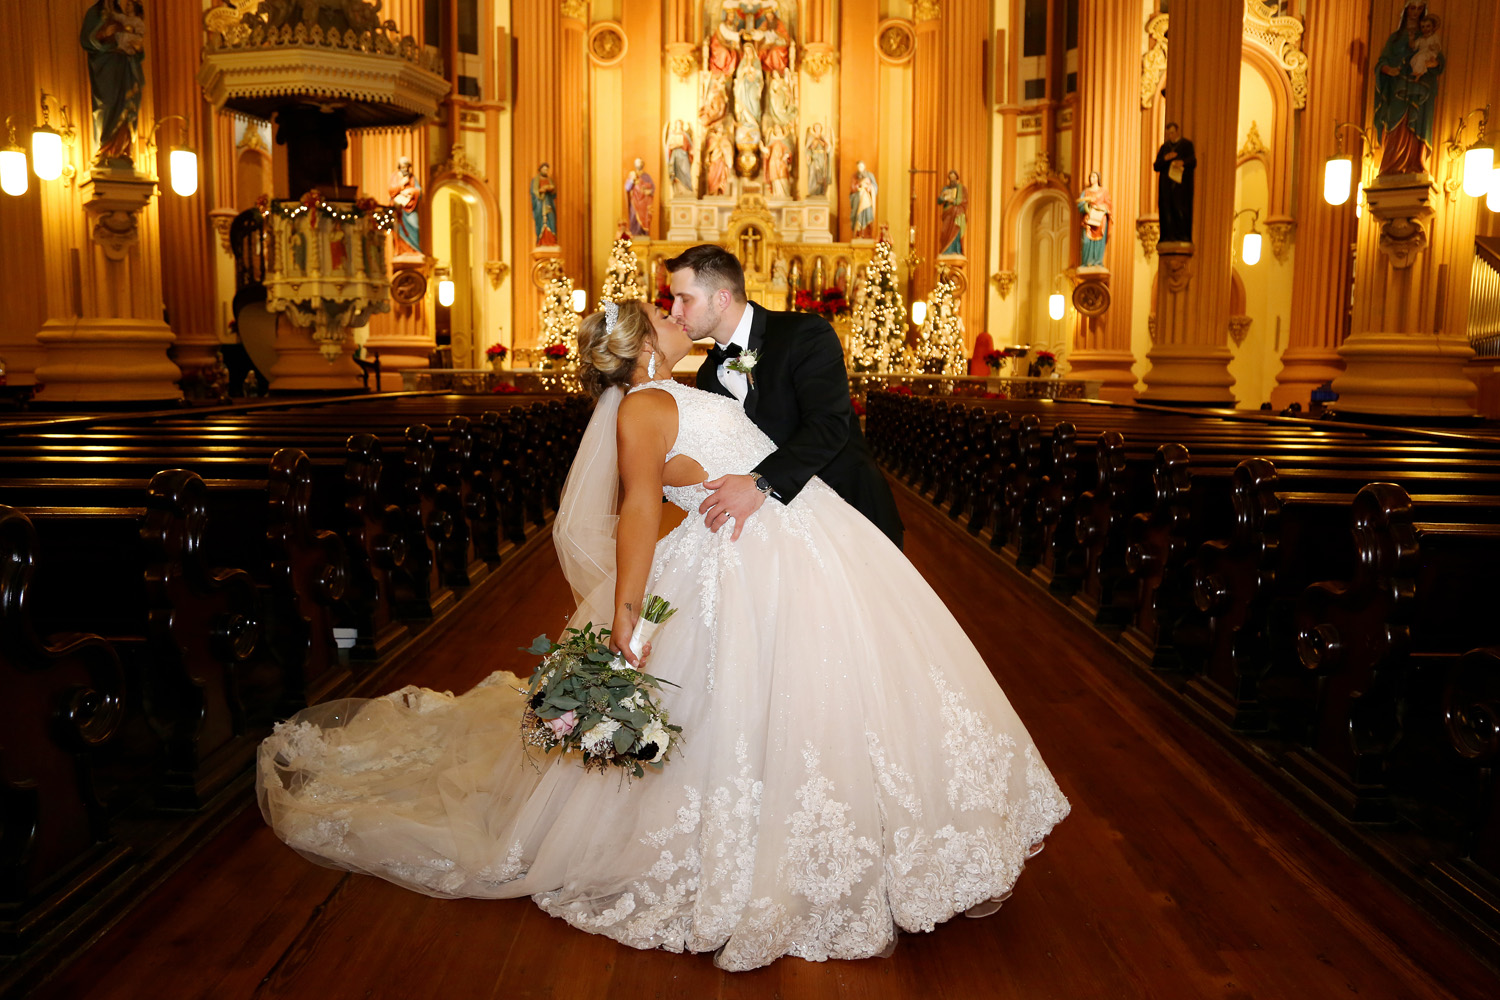 David and Courtney stop for a kiss after their wedding ceremony at St. Mary's Assumption Church in New Orleans.